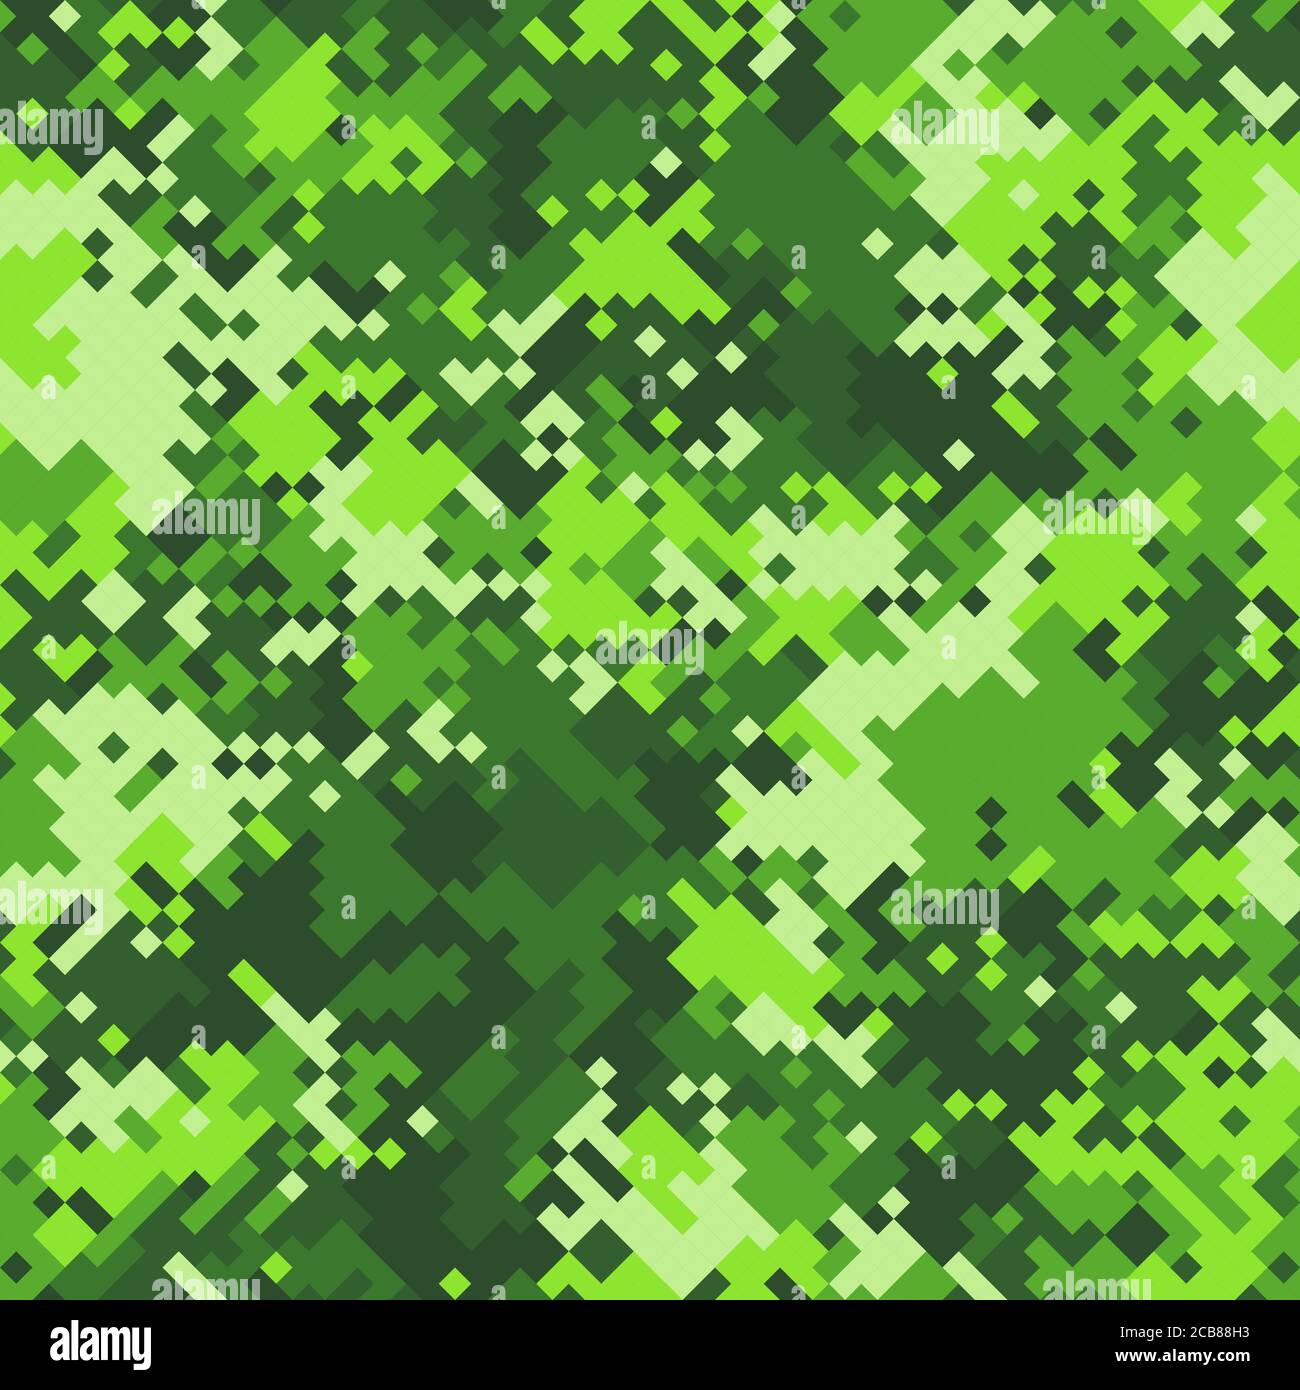 Green slime halftones pixel clouds seamless pattern vector background texture Stock Vector